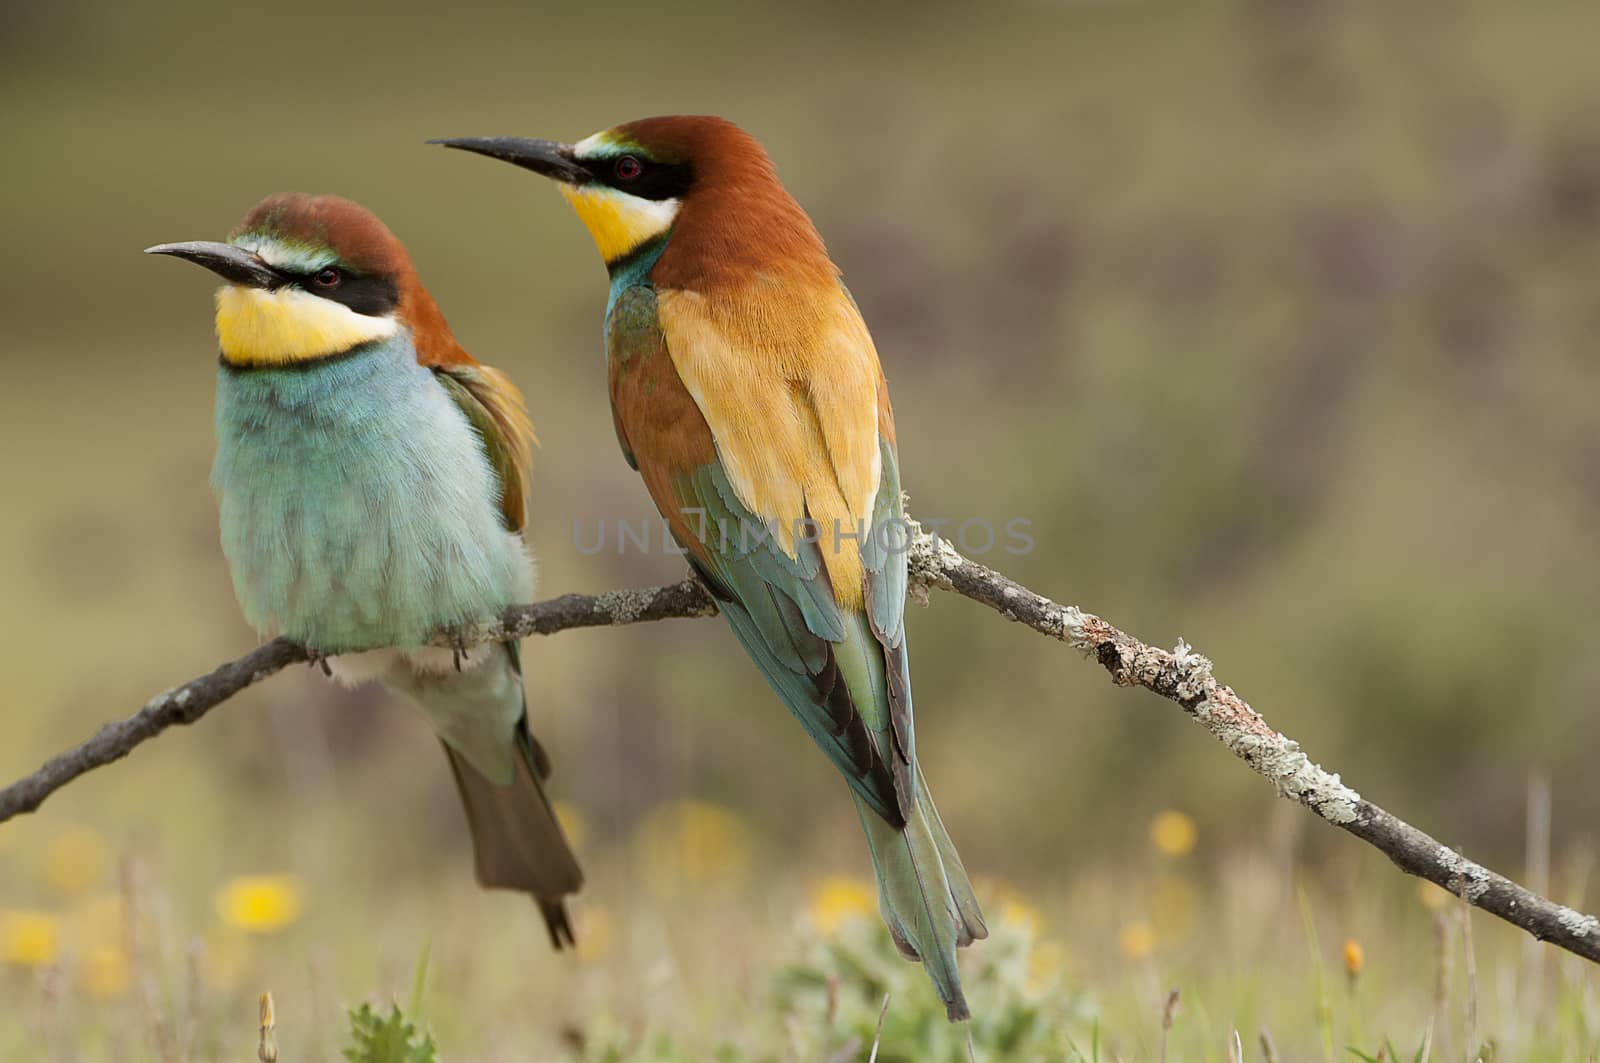 European bee-eater (Merops apiaster), couple perched on a branch by jalonsohu@gmail.com